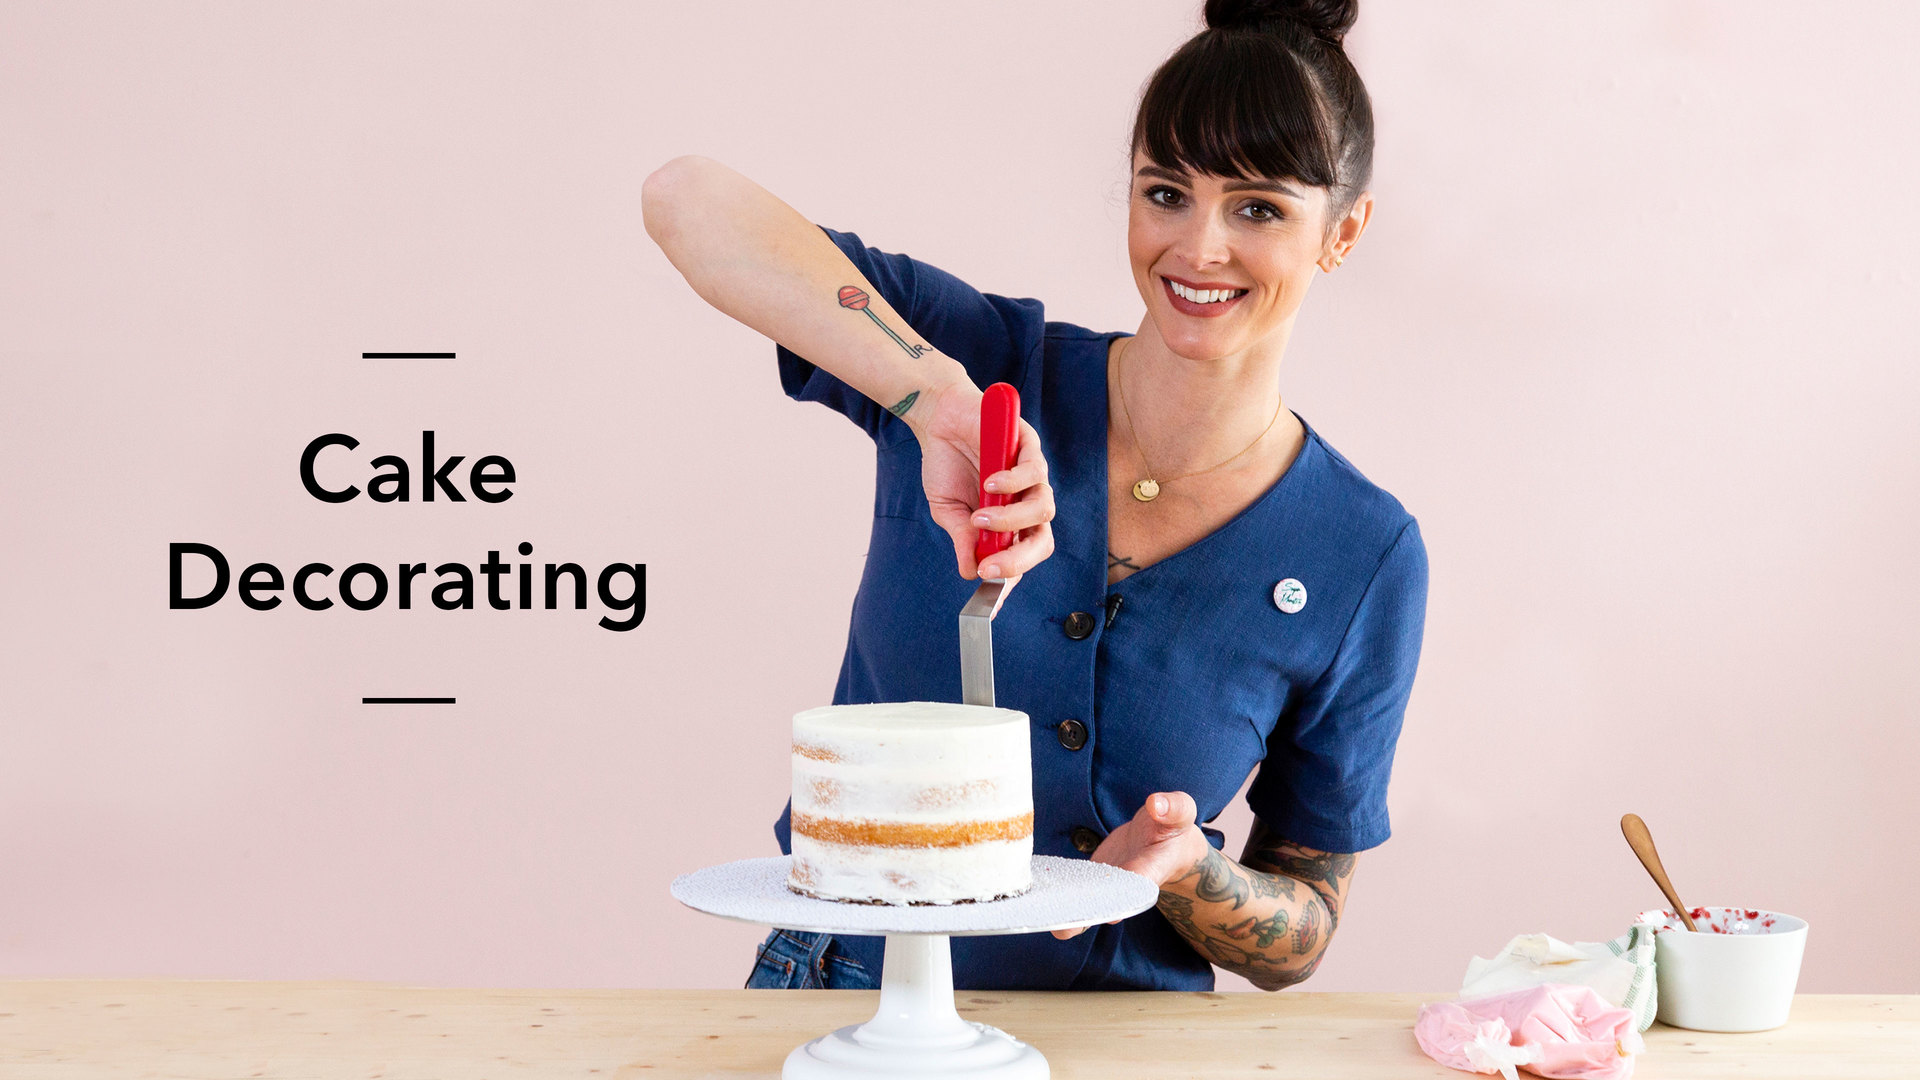 Craftsy Blog Post Roundup – Free Cake Decorating Tutorials and More!